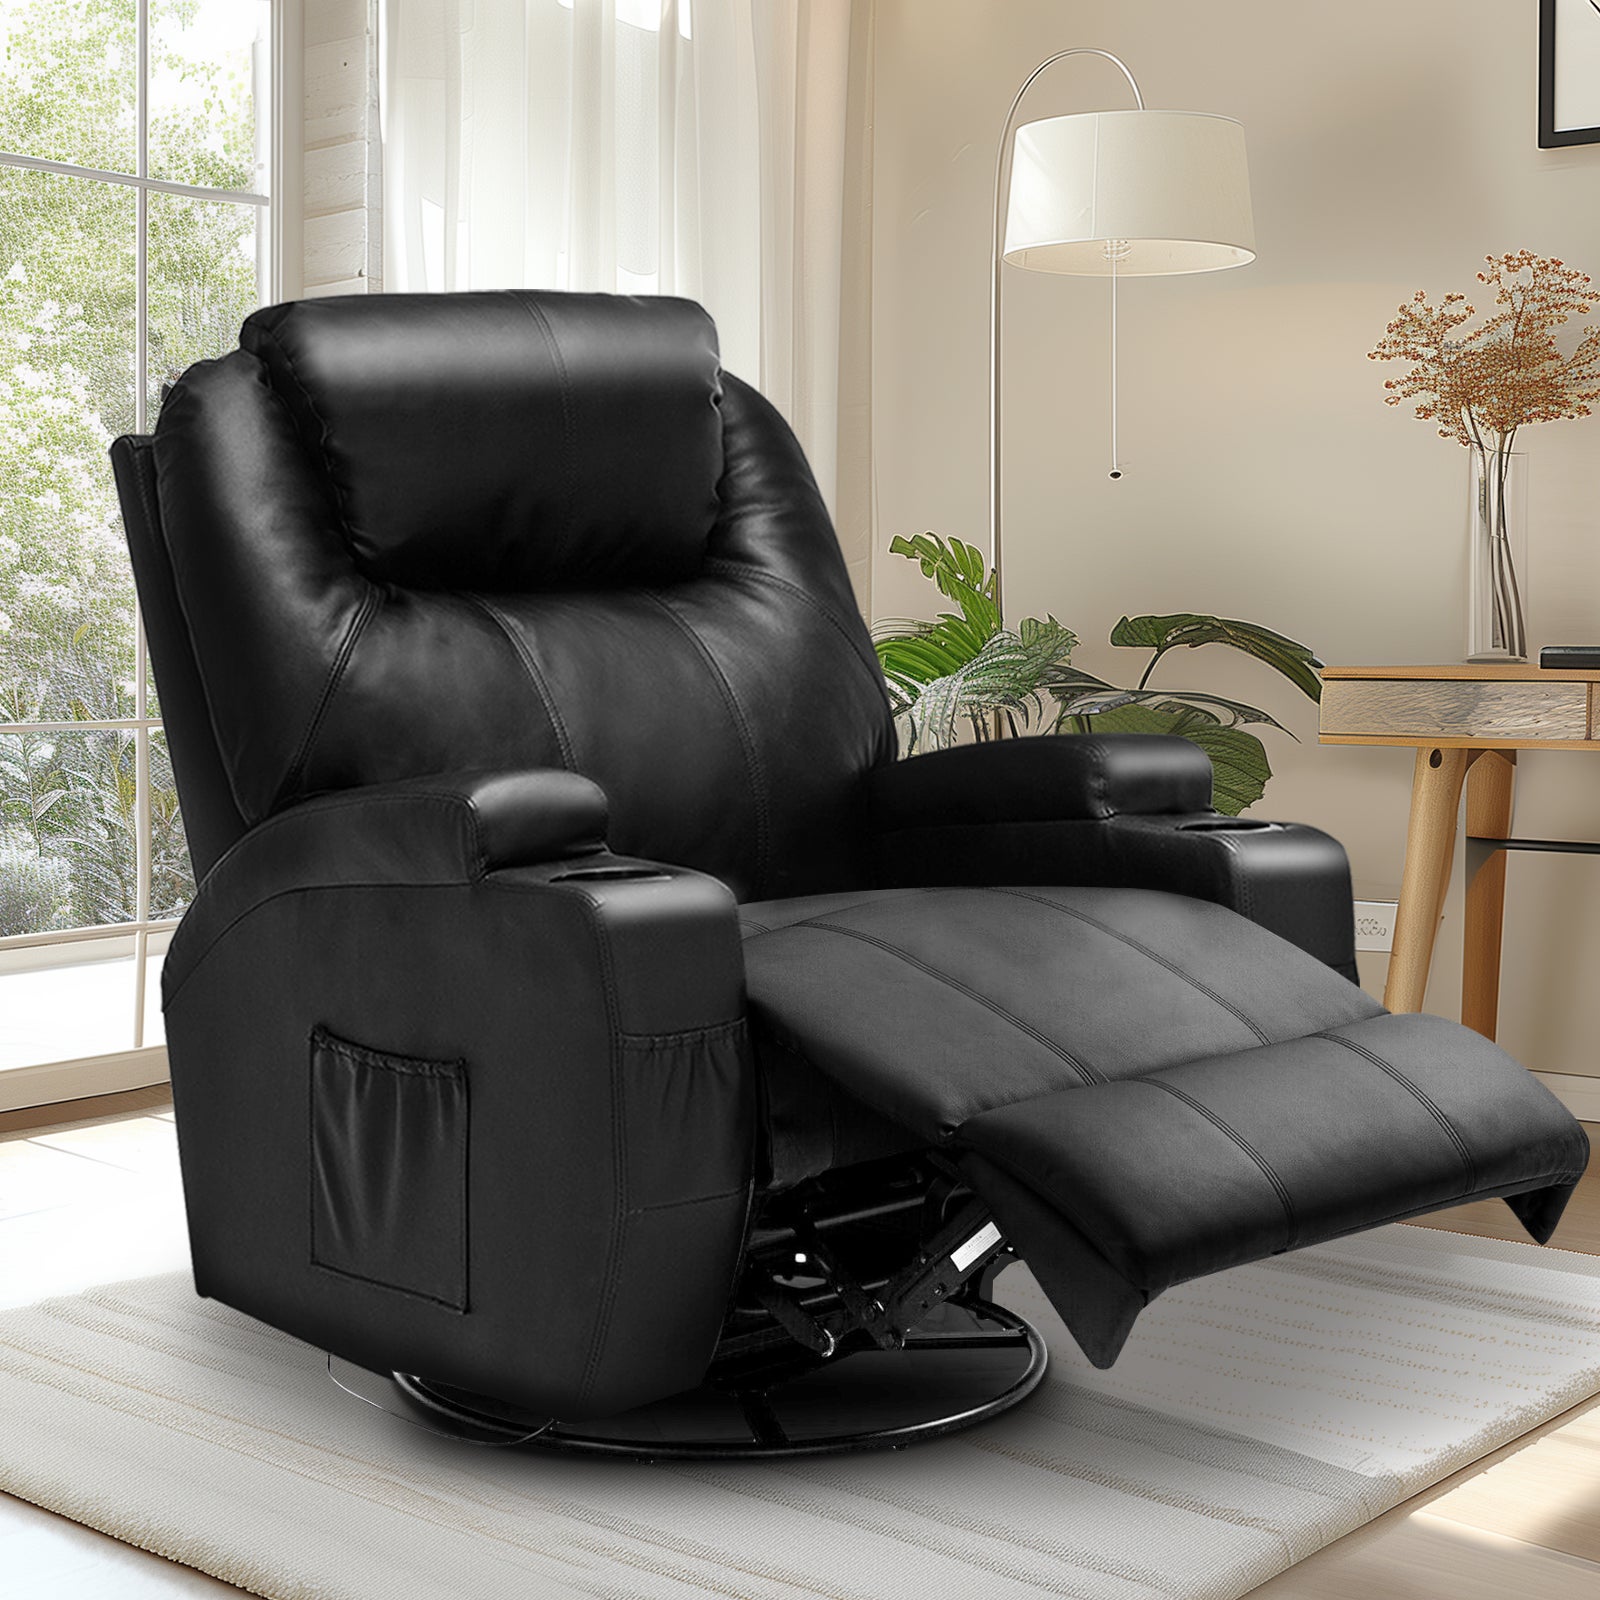 Advwin Massage Chair Heated Recliner Lift Rotate Base PU Leather Black